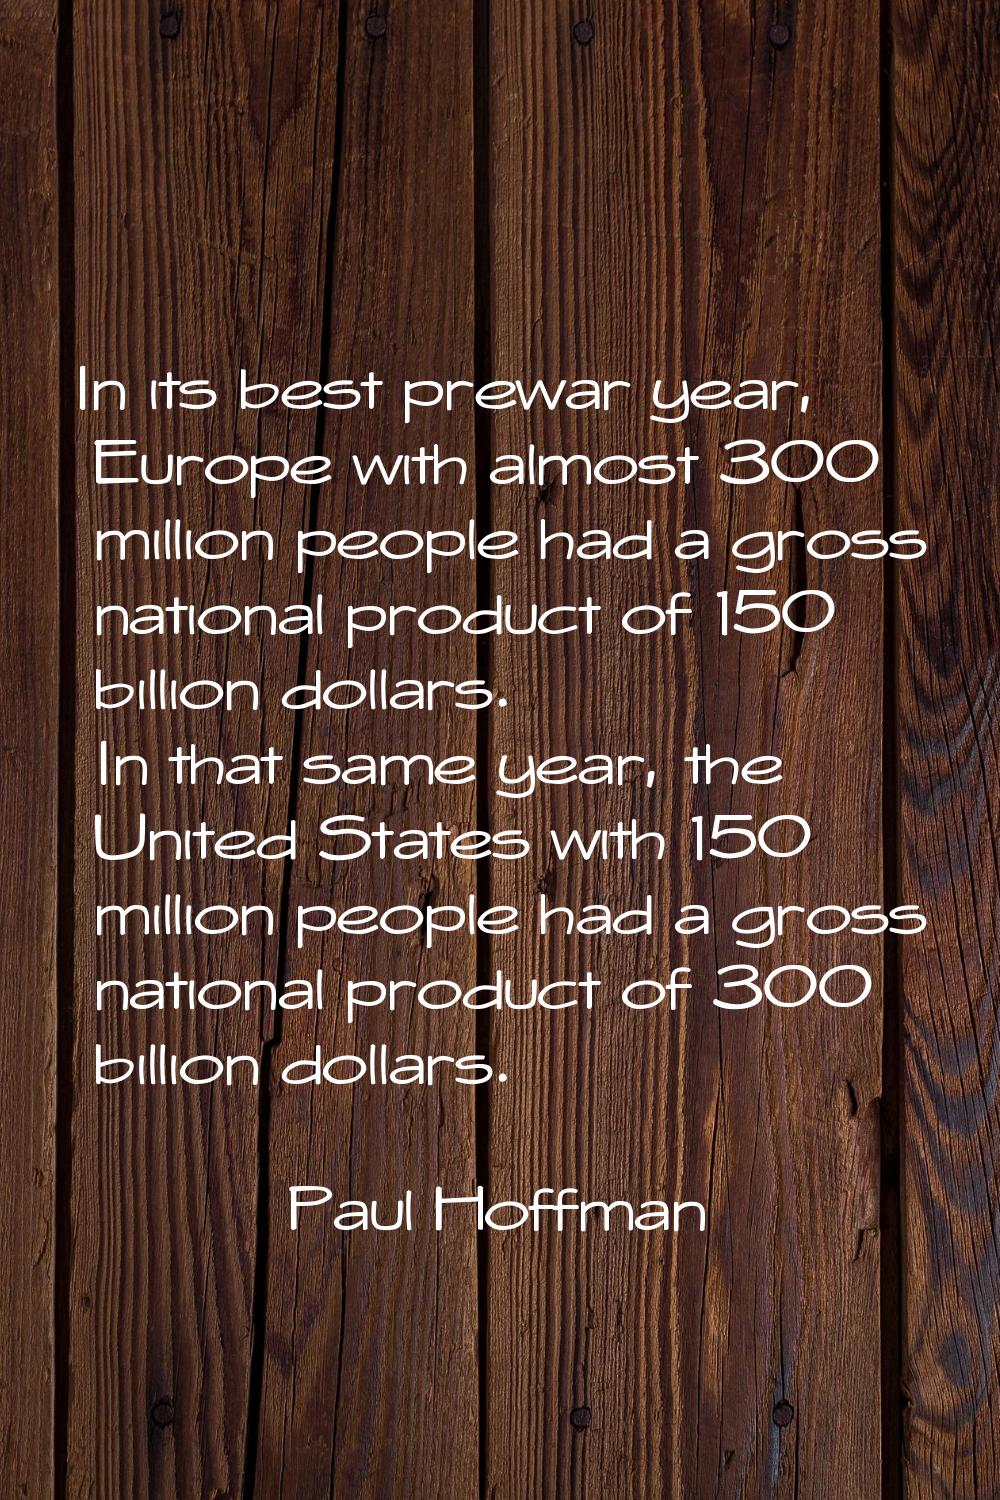 In its best prewar year, Europe with almost 300 million people had a gross national product of 150 